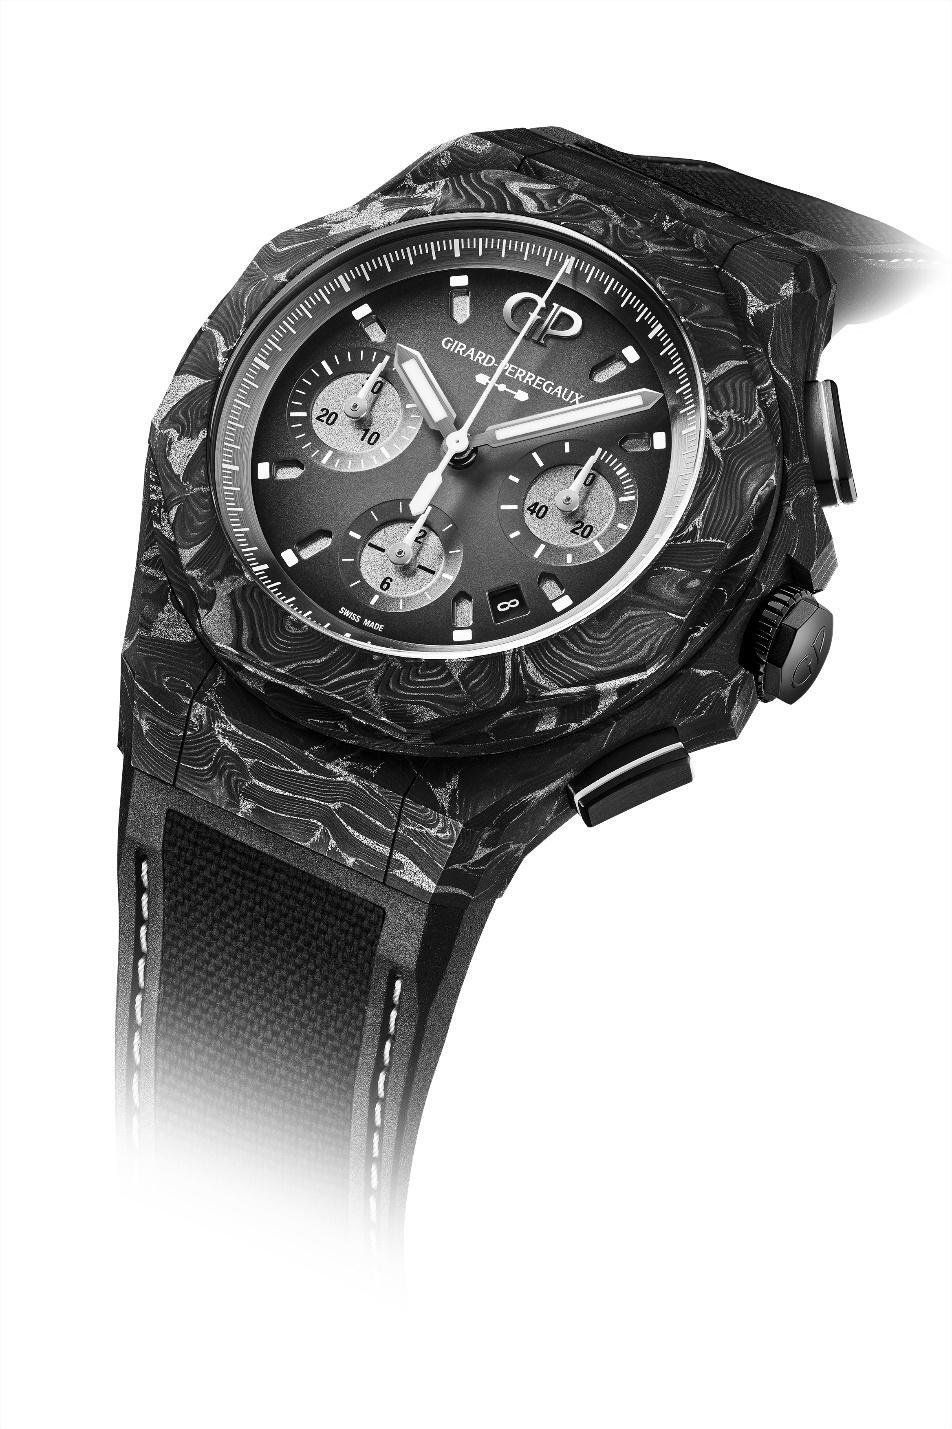 Laureato Absolute 8tech is dominated by octagonal geometric elements